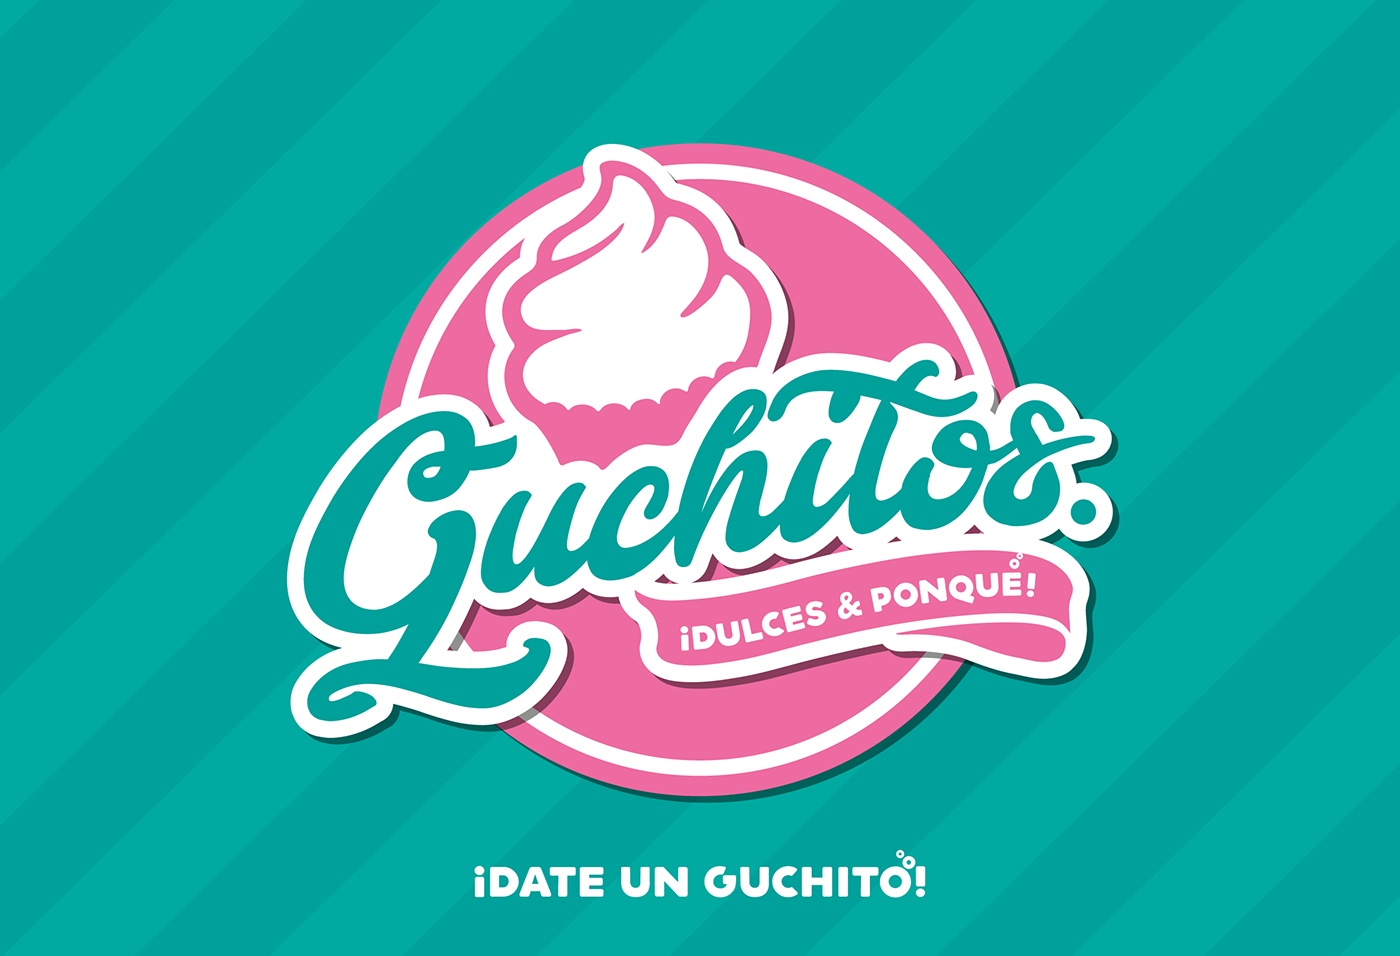 guchitos branding  design graphic design  logos cakes cupcakes tipography cookies pastry